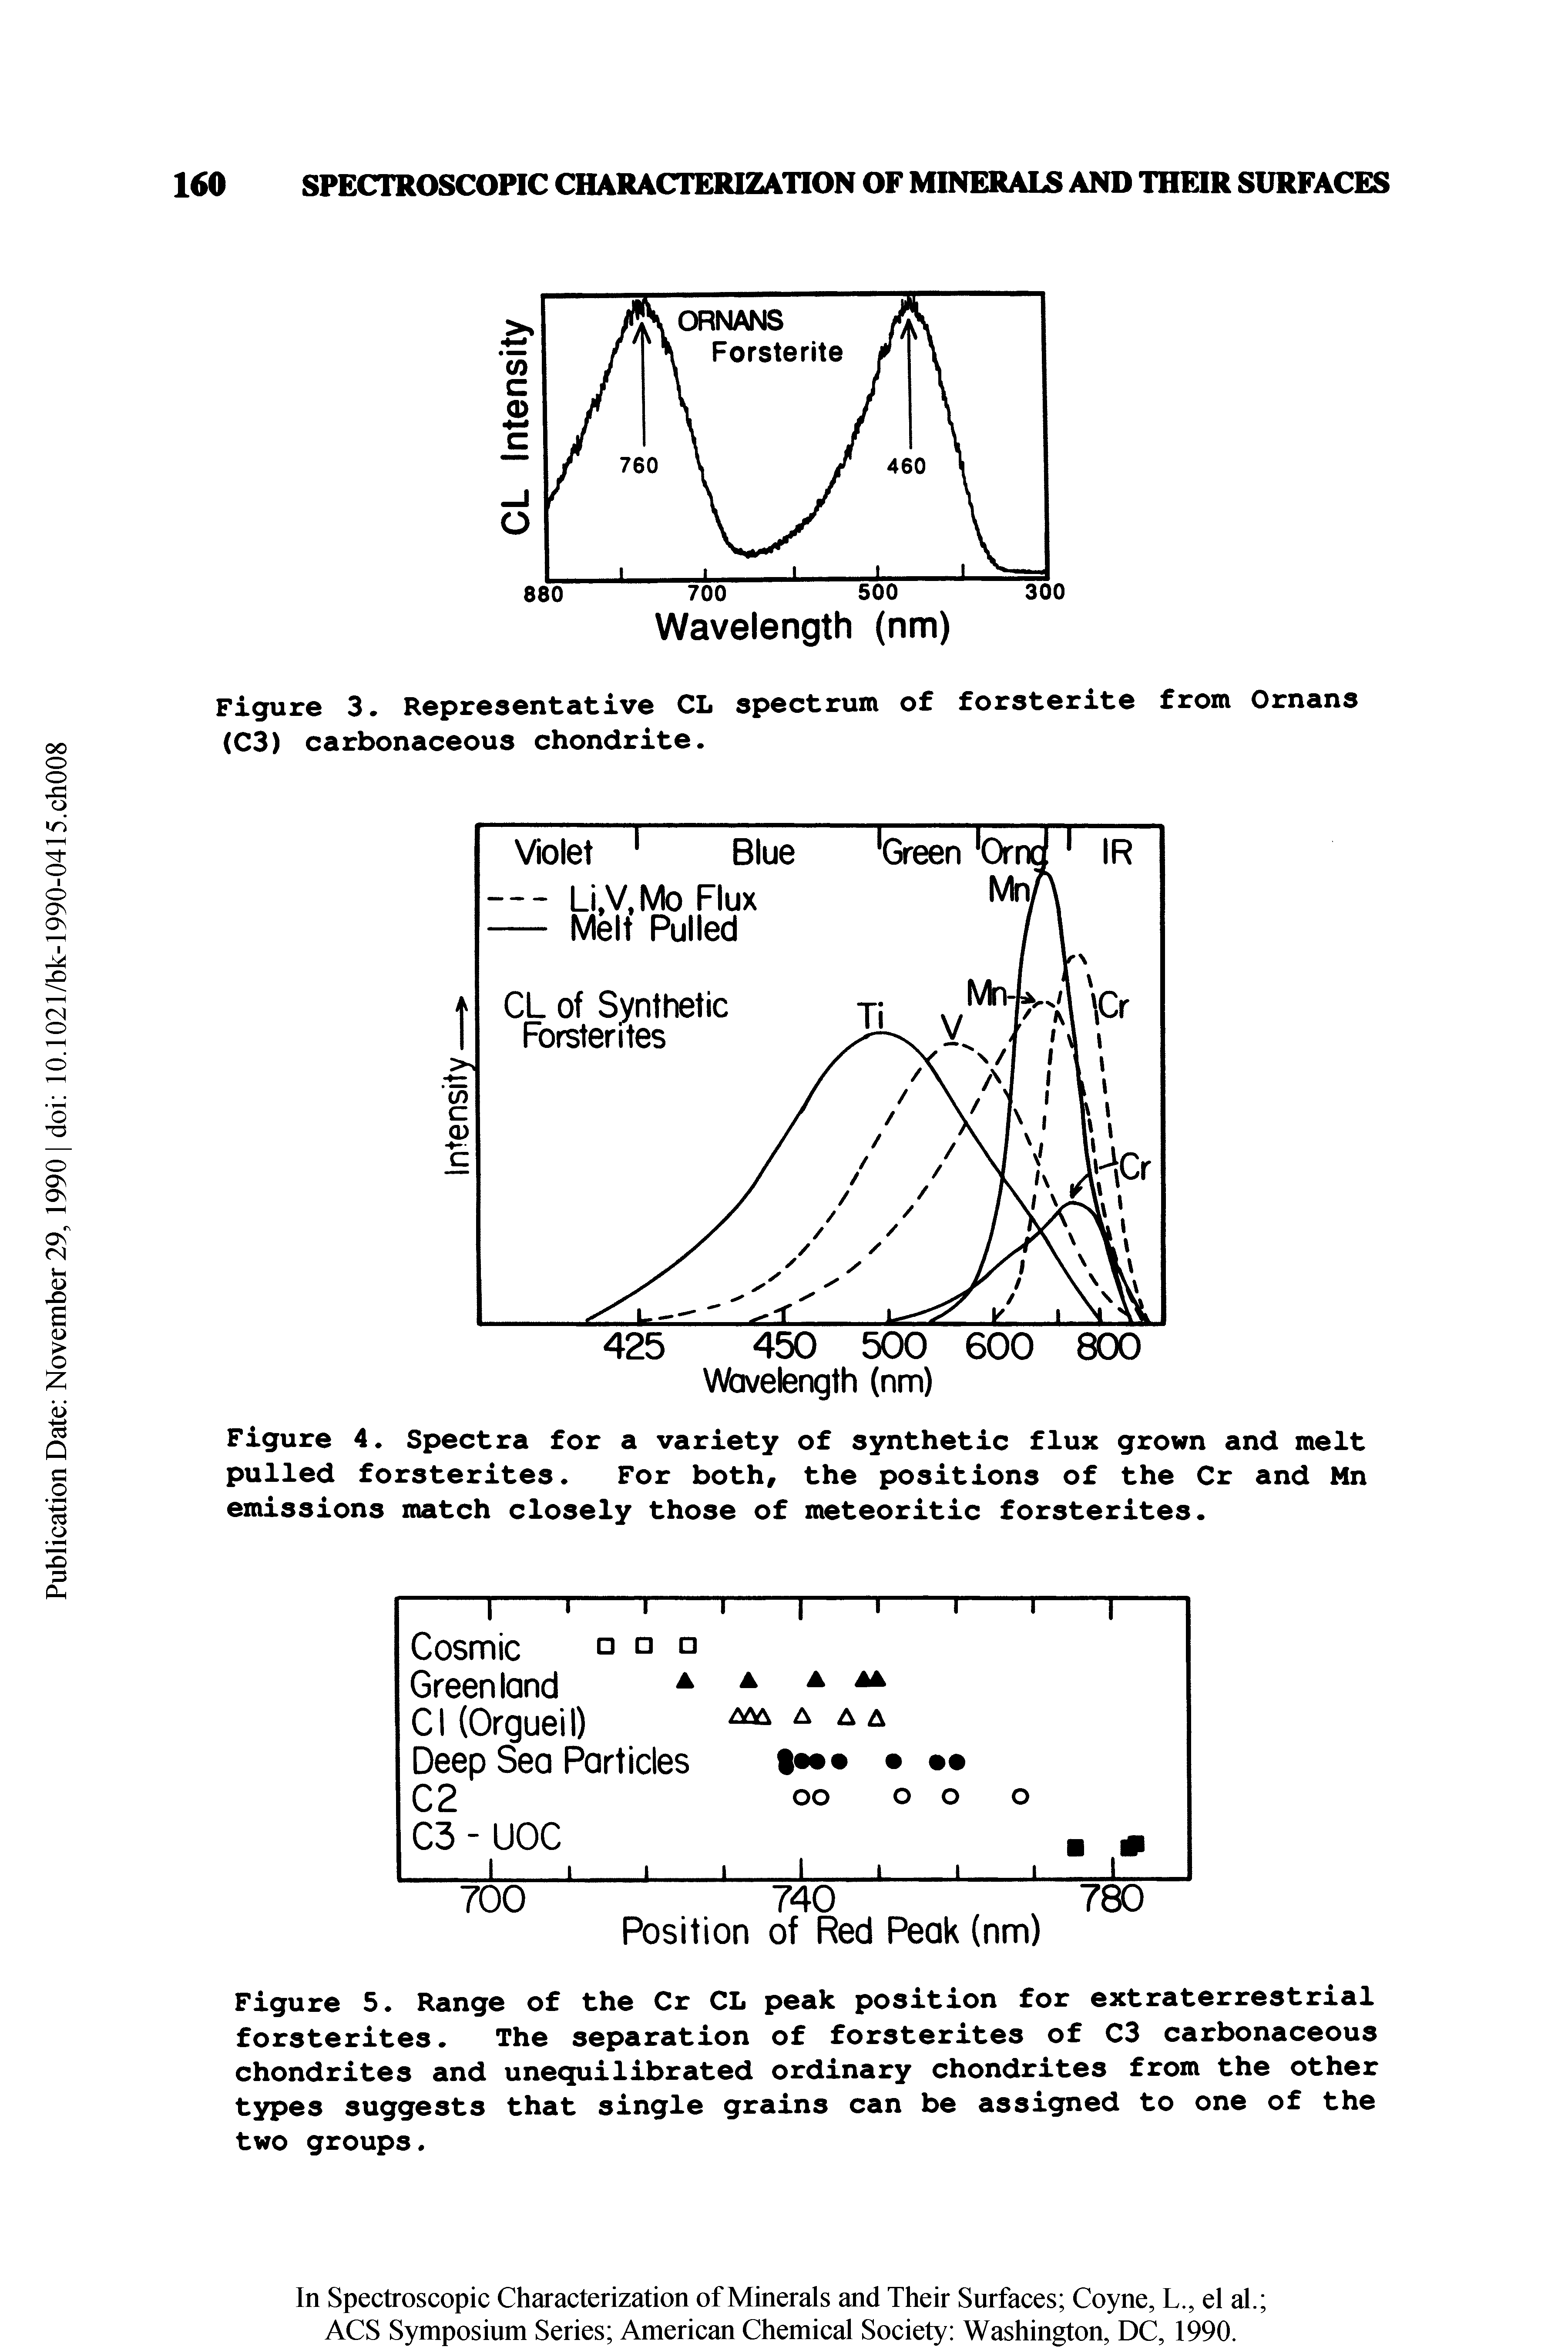 Figure 4. Spectra for a variety of synthetic flux grown and melt pulled forsterites. For both, the positions of the Cr and Mn emissions match closely those of meteoritic forsterites.